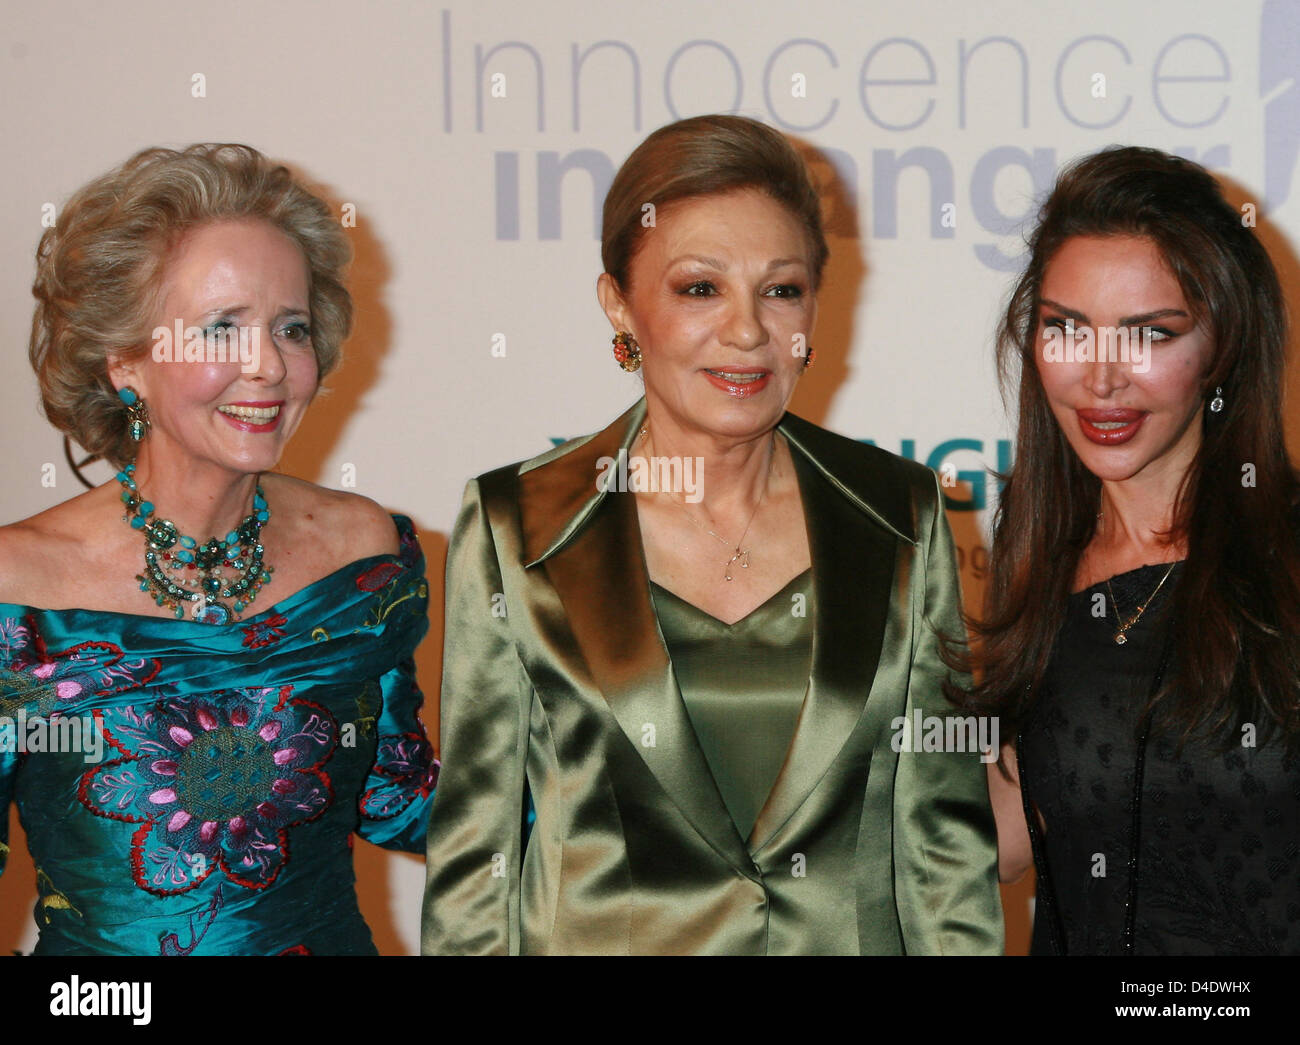 Countess Isa von Hardenberg (l-R), former empress of Persia, Farah Diba Pahlavi and Homayra Sallier, chairwoman of the 'Innocence in Danger' association arrive at the 'Innocence in Danger' gala at Hotel Grand Hyatt in Berlin, Germany, 26 April 2008. 480 guests joined the gala to take on against children's abuse in the Internet. Photo: JENS KALAENE Stock Photo